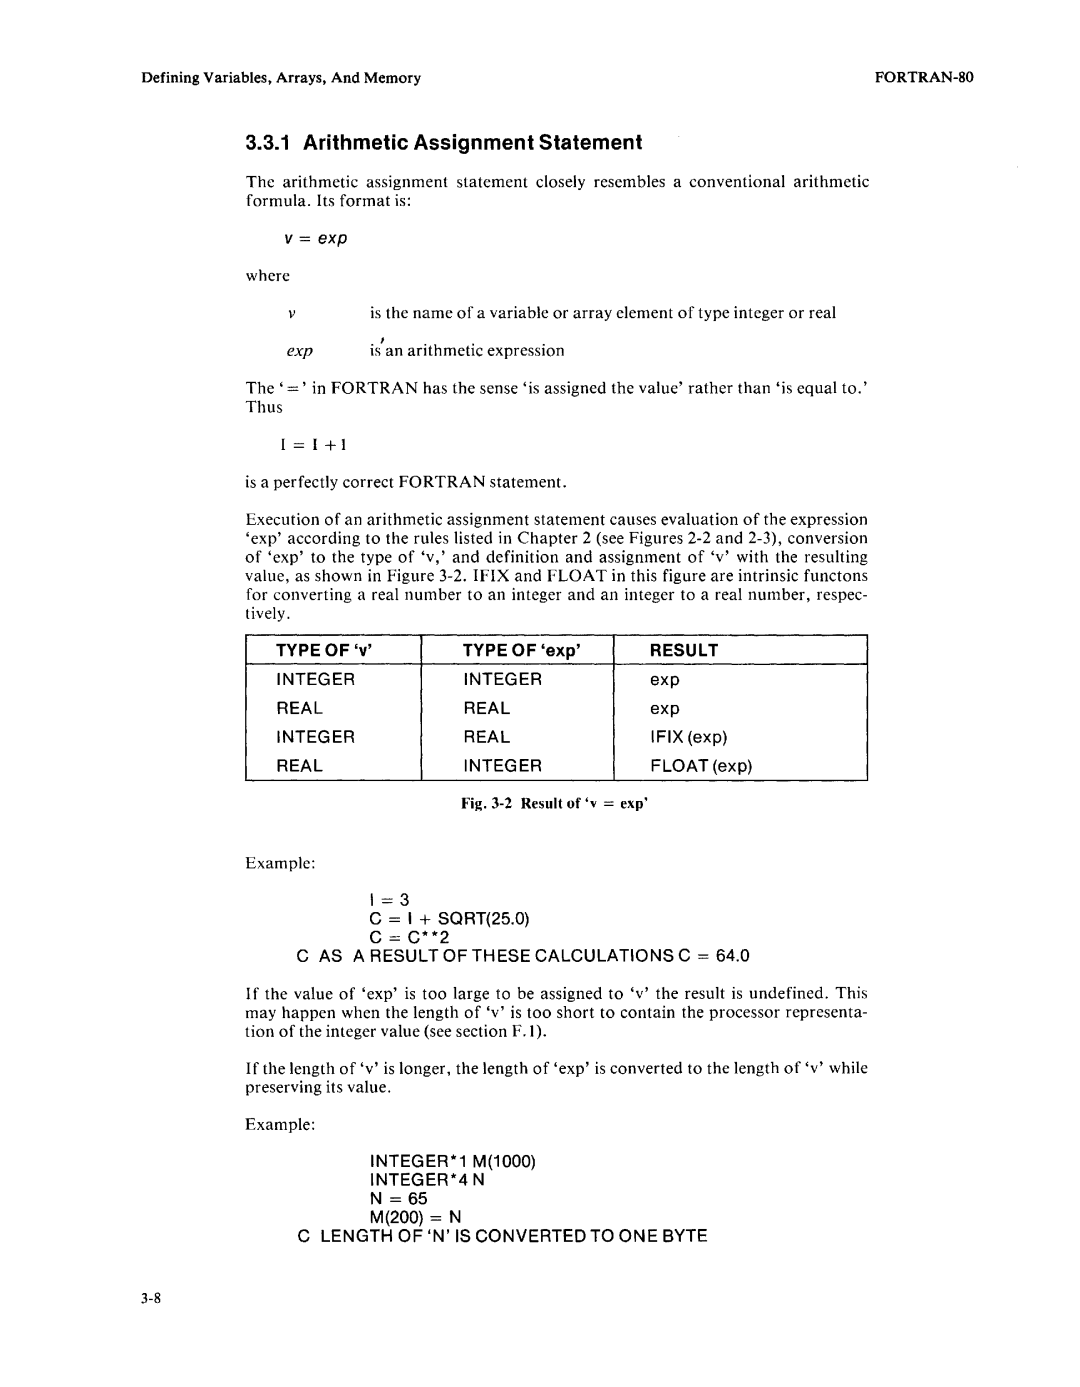 Intel fortran-80 manual Arithmetic Assignment Statement, Type Of, TYPE OF exp, Result 